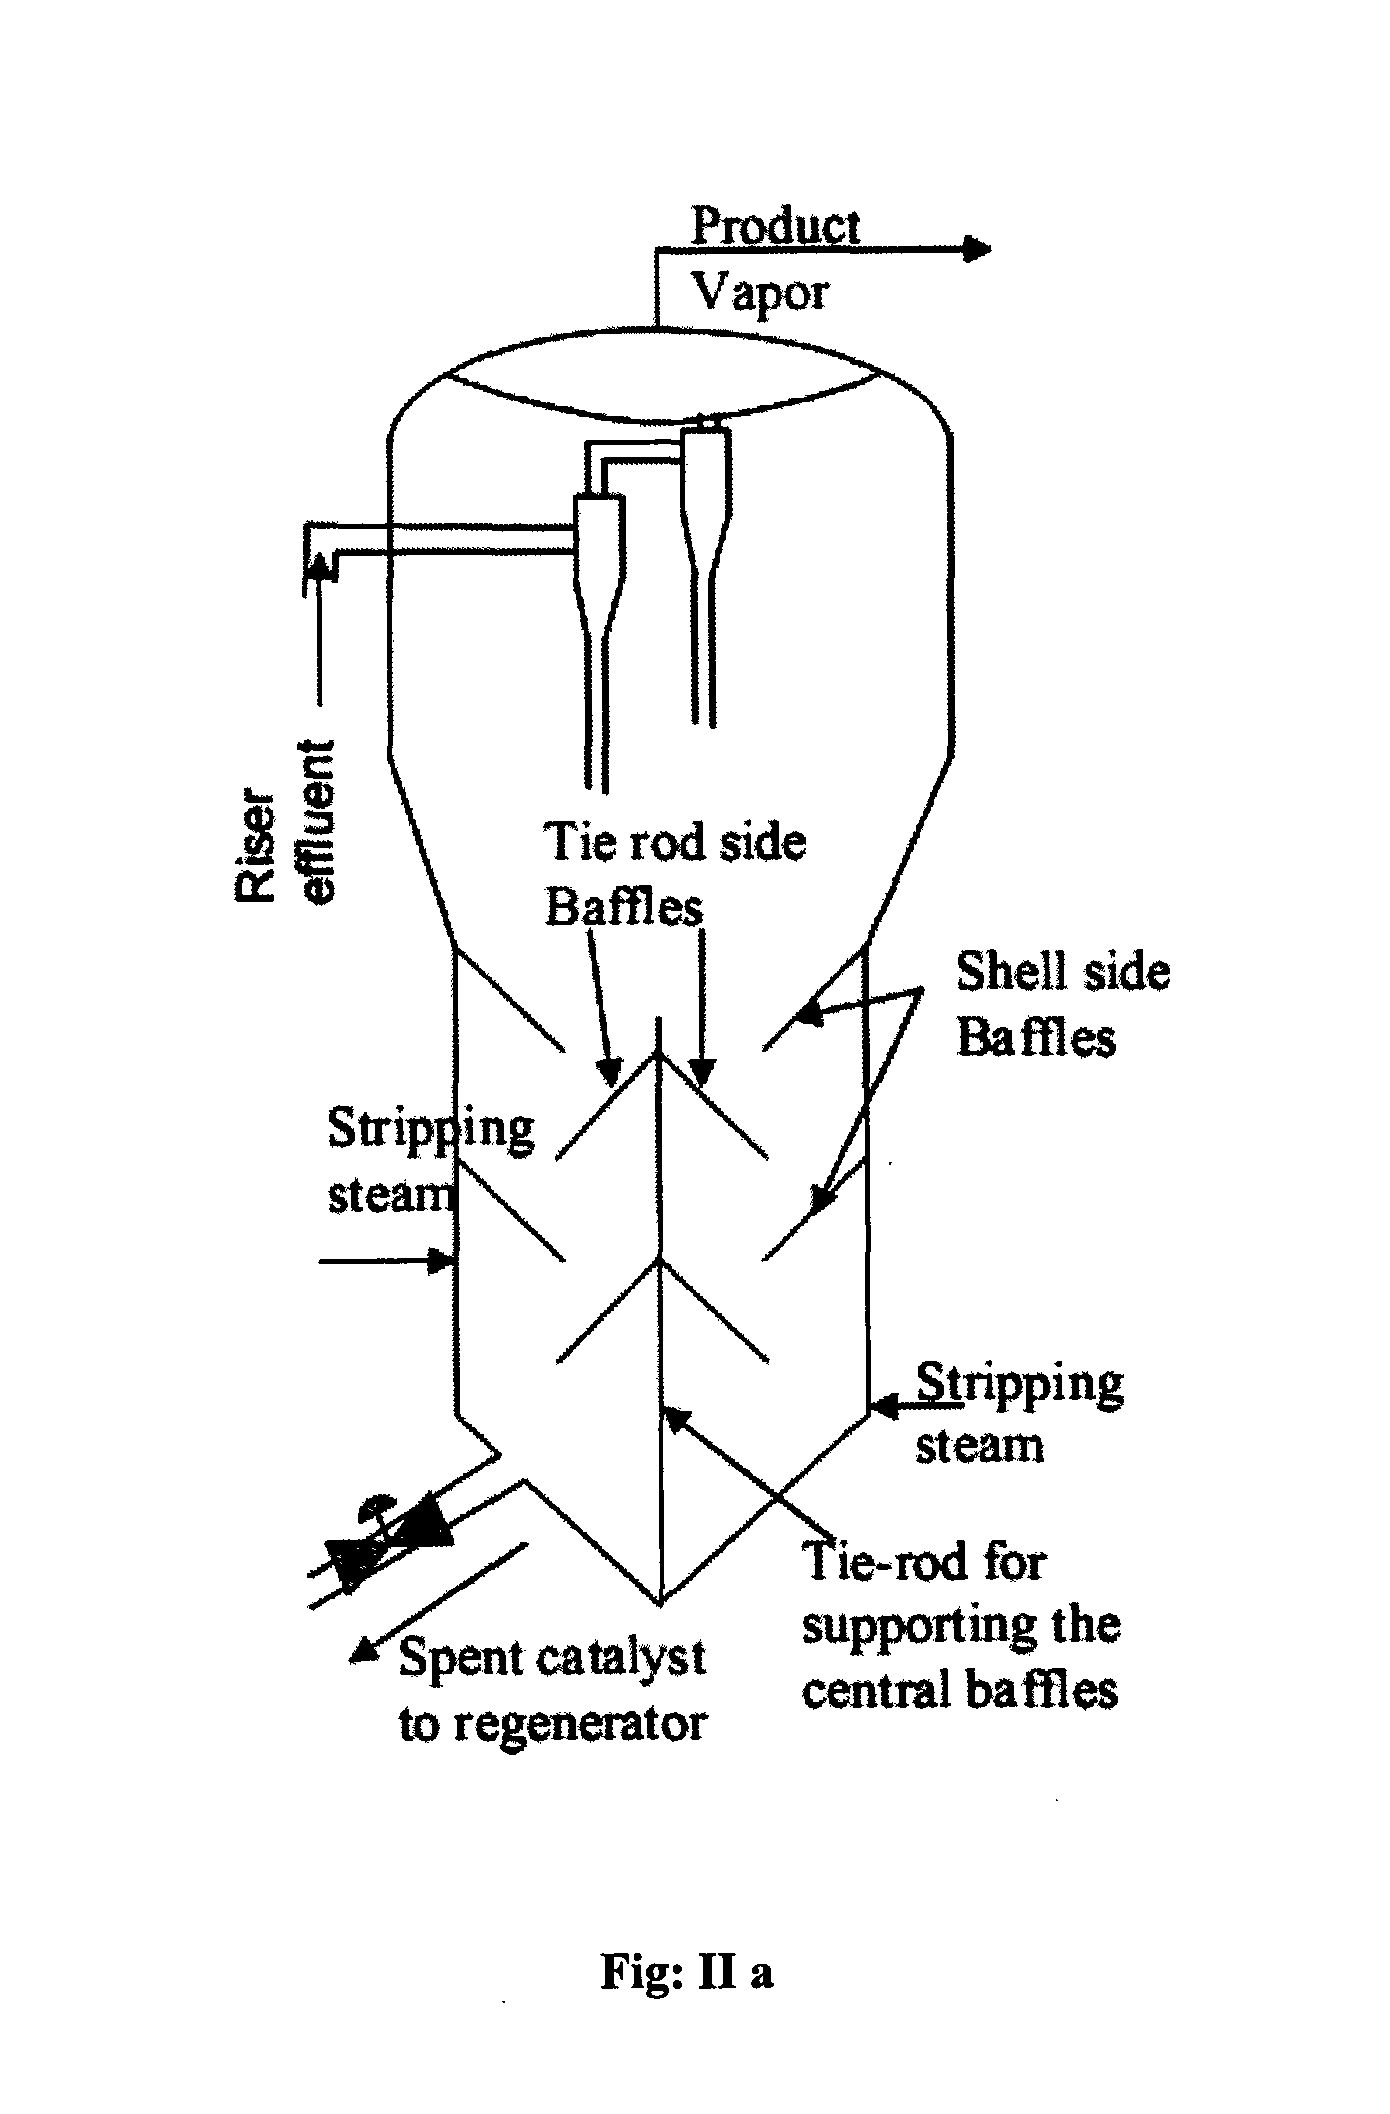 Multi riser resid catalytic cracking process and apparatus